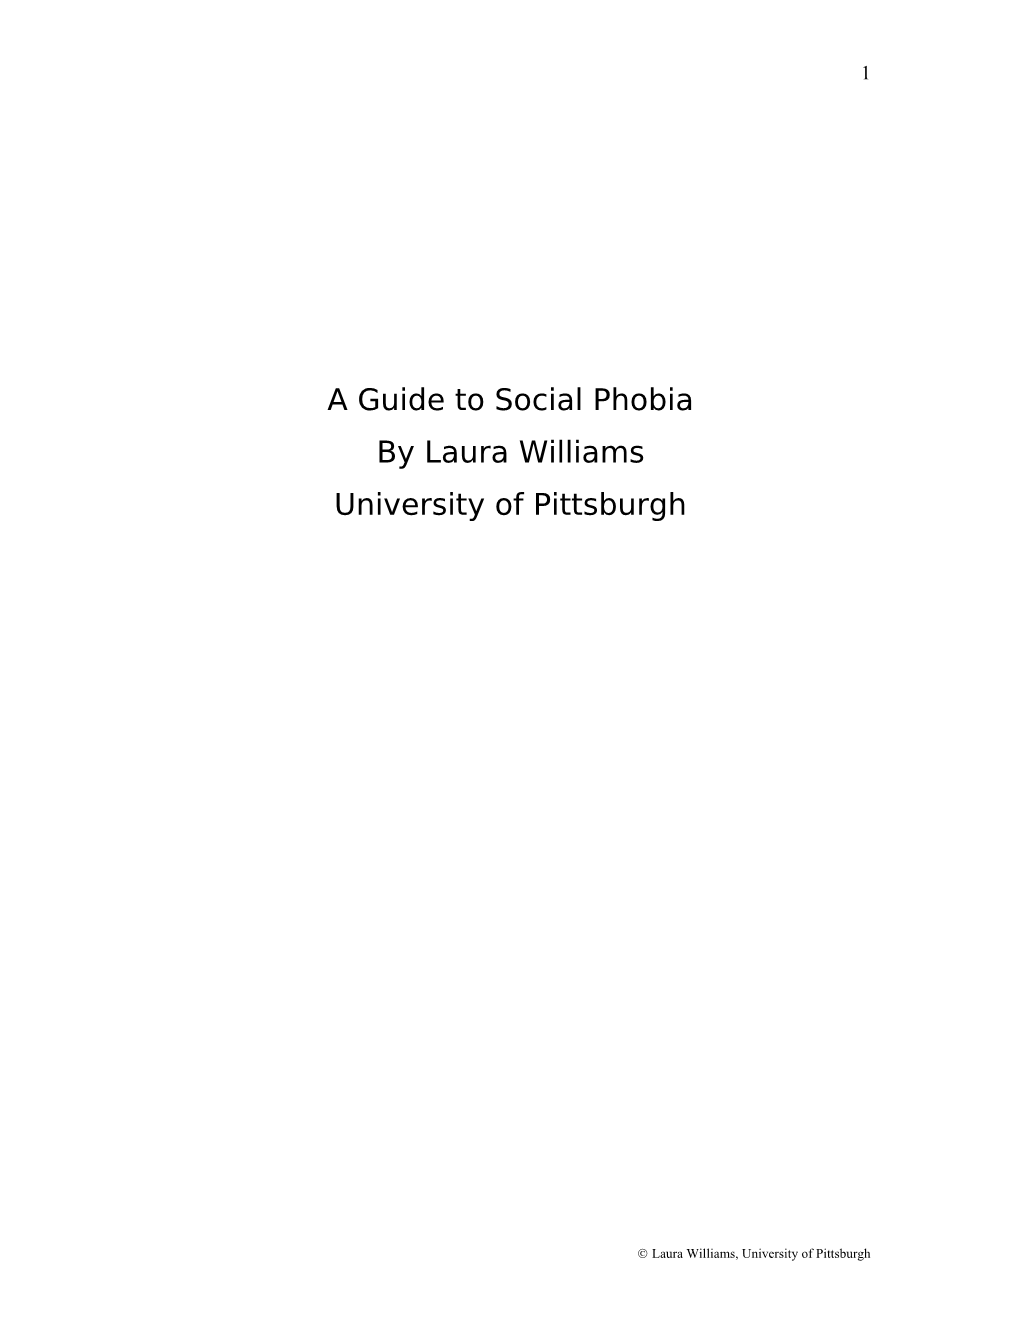 A Guide to Social Phobia